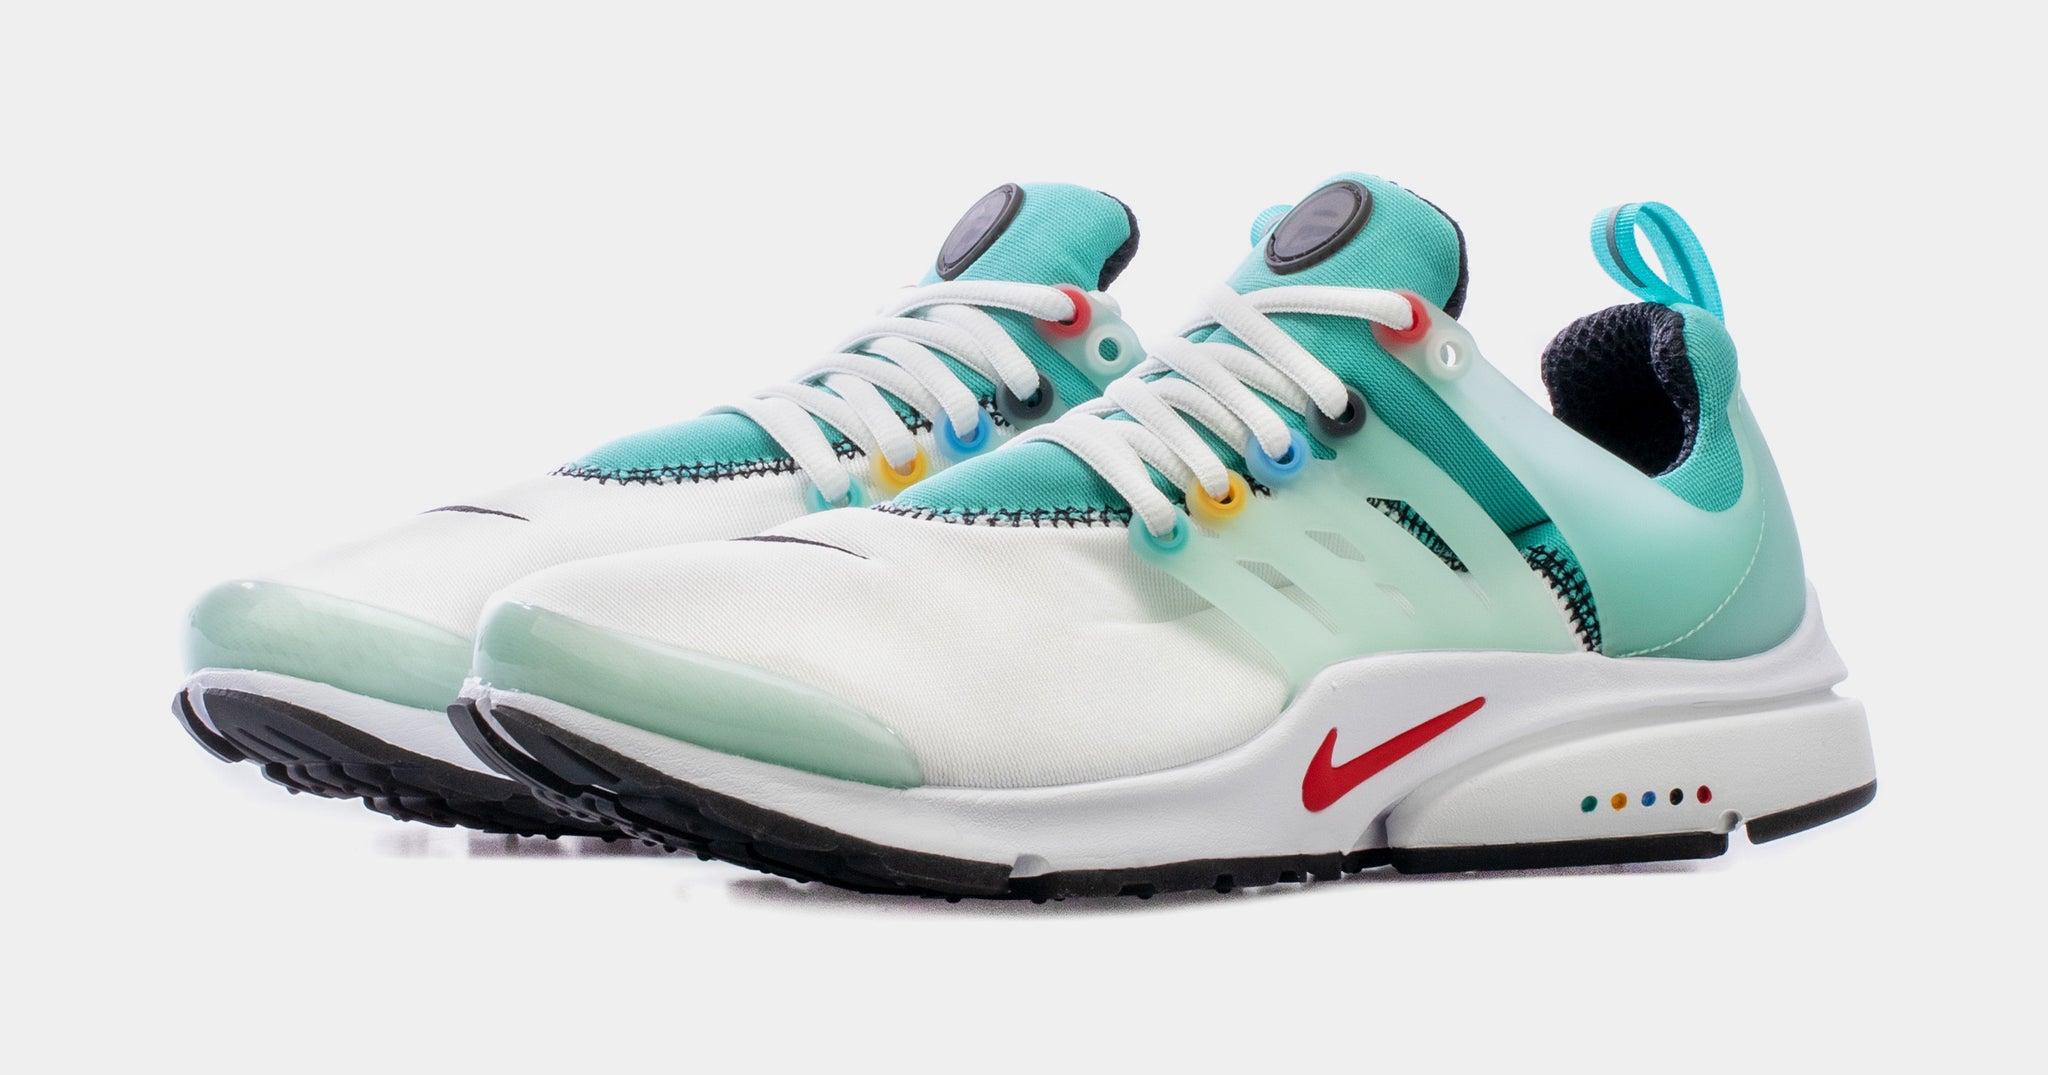 Nike Air Presto Stained Glass Mens Lifestyle Shoes Green Teal